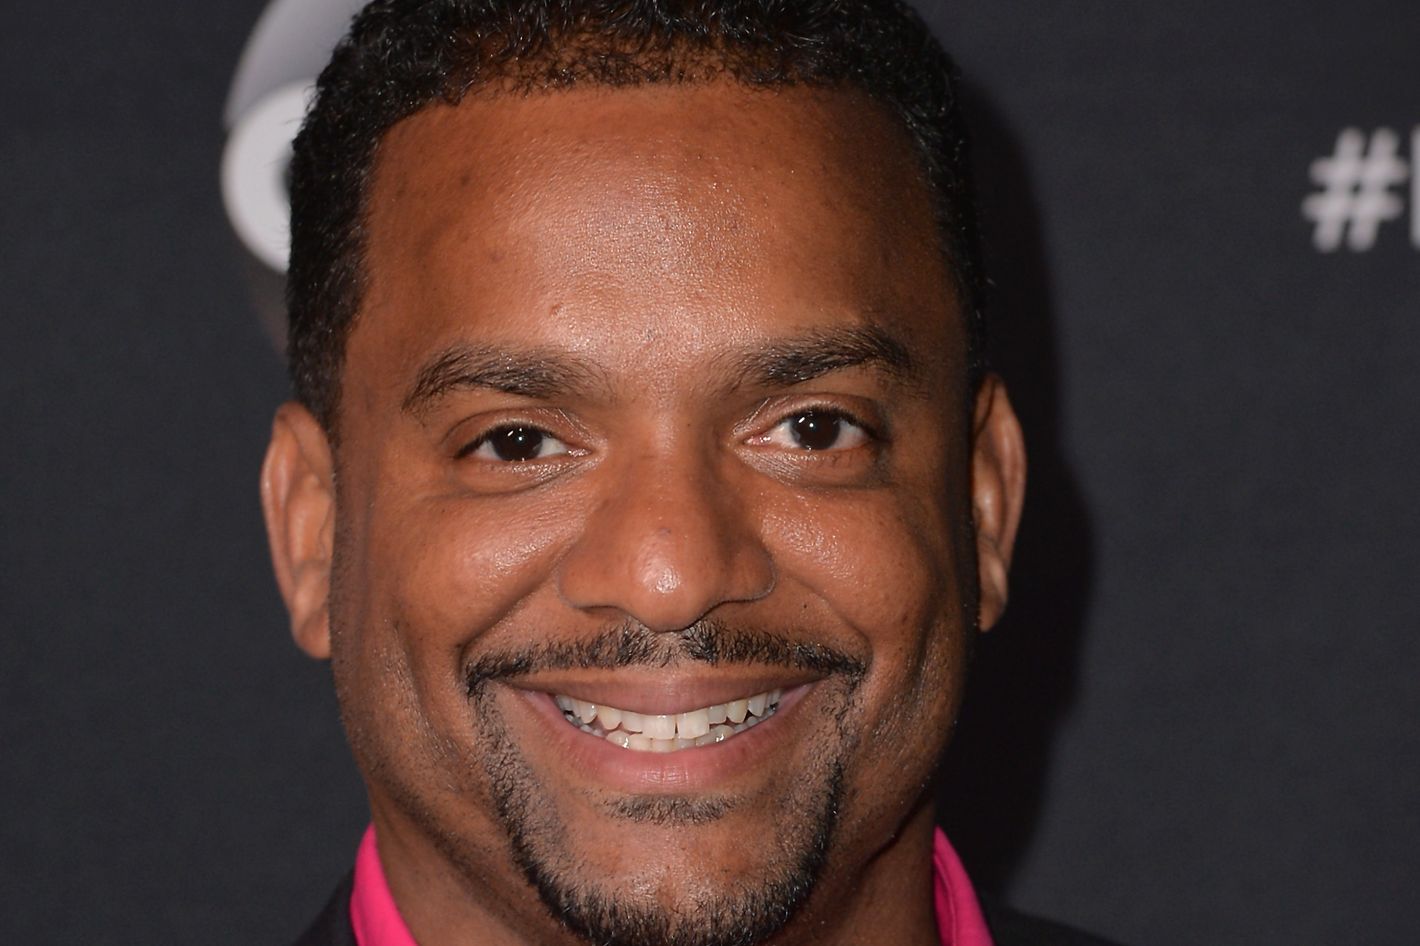 Alfonso Ribeiro Will Be the New Host of America's Funniest Home Videos